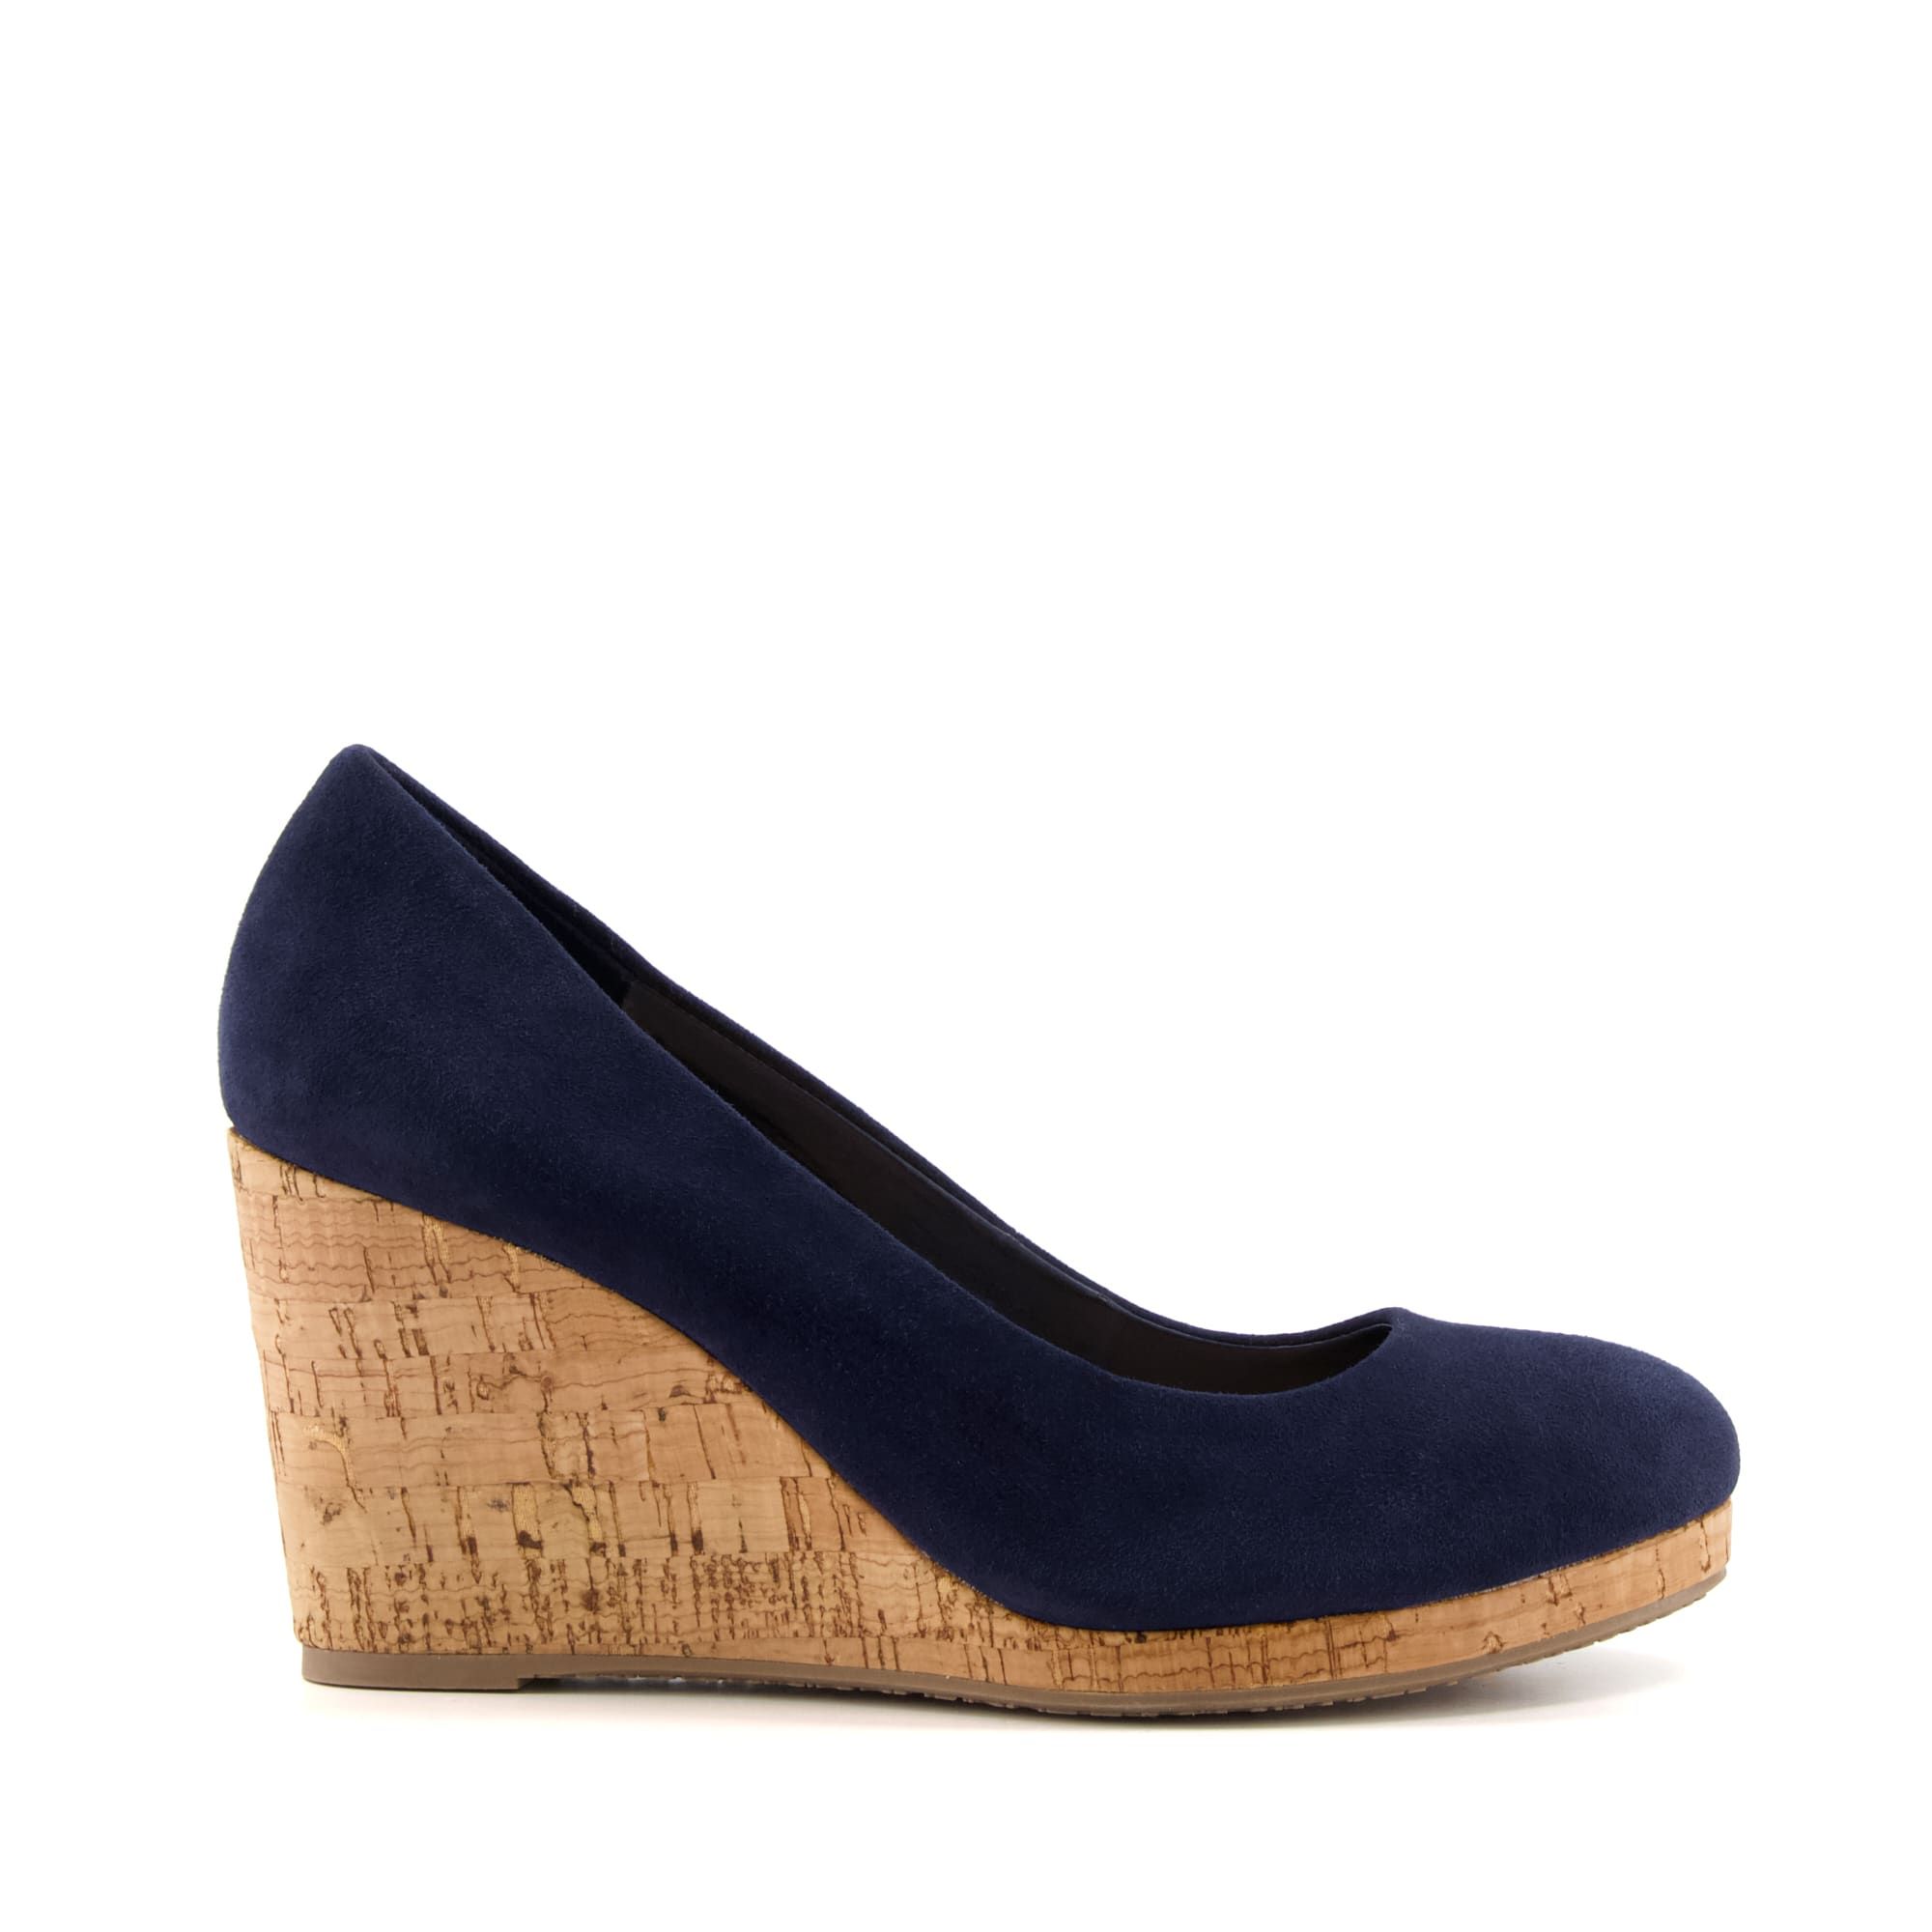 A holiday must-have, these wedges are comfortable, stylish and boast a summery cork sole.